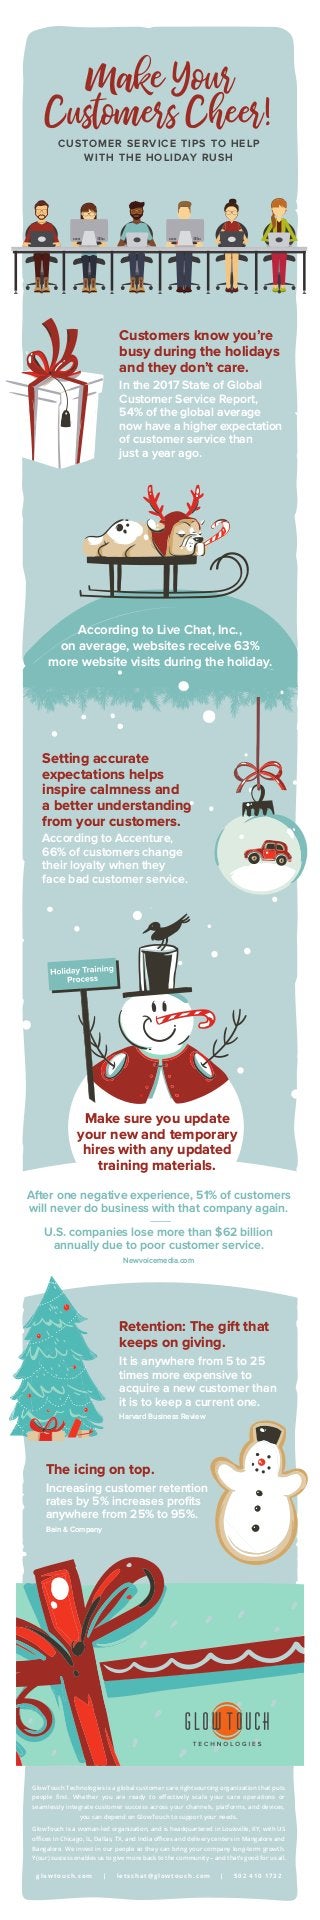 CUSTOMER SERVICE TIPS TO HELP
WITH THE HOLIDAY RUSH
Customers know you’re
busy during the holidays
and they don’t care.
In the 2017 State of Global
Customer Service Report,
54% of the global average
now have a higher expectation
of customer service than
just a year ago.
Retention: The gift that
keeps on giving.
It is anywhere from 5 to 25
times more expensive to
acquire a new customer than
it is to keep a current one.
Harvard Business Review
The icing on top.
Increasing customer retention
rates by 5% increases proﬁts
anywhere from 25% to 95%.
Bain & Company
Setting accurate
expectations helps
inspire calmness and
a better understanding
from your customers.
According to Accenture,
66% of customers change
their loyalty when they
face bad customer service.
Make Your
Customers Cheer!
According to Live Chat, Inc.,
on average, websites receive 63%
more website visits during the holiday.
Make sure you update
your new and temporary
hires with any updated
training materials.
After one negative experience, 51% of customers
will never do business with that company again.
U.S. companies lose more than $62 billion
annually due to poor customer service.
Newvoicemedia.com
GlowTouch Technologies is a global customer care rightsourcing organization that puts
people ﬁrst. Whether you are ready to eﬀectively scale your care operations or
seamlessly integrate customer success across your channels, platforms, and devices,
you can depend on GlowTouch to support your needs.
GlowTouch is a woman-led organization, and is headquartered in Louisville, KY, with US
oﬃces in Chicago, IL, Dallas, TX, and India oﬃces and delivery centers in Mangalore and
Bangalore. We invest in our people so they can bring your company long-term growth.
Y(our) success enables us to give more back to the community – and that’s good for us all.
glowtouch.com | letschat@glowtouch.com | 502 410 1732
 